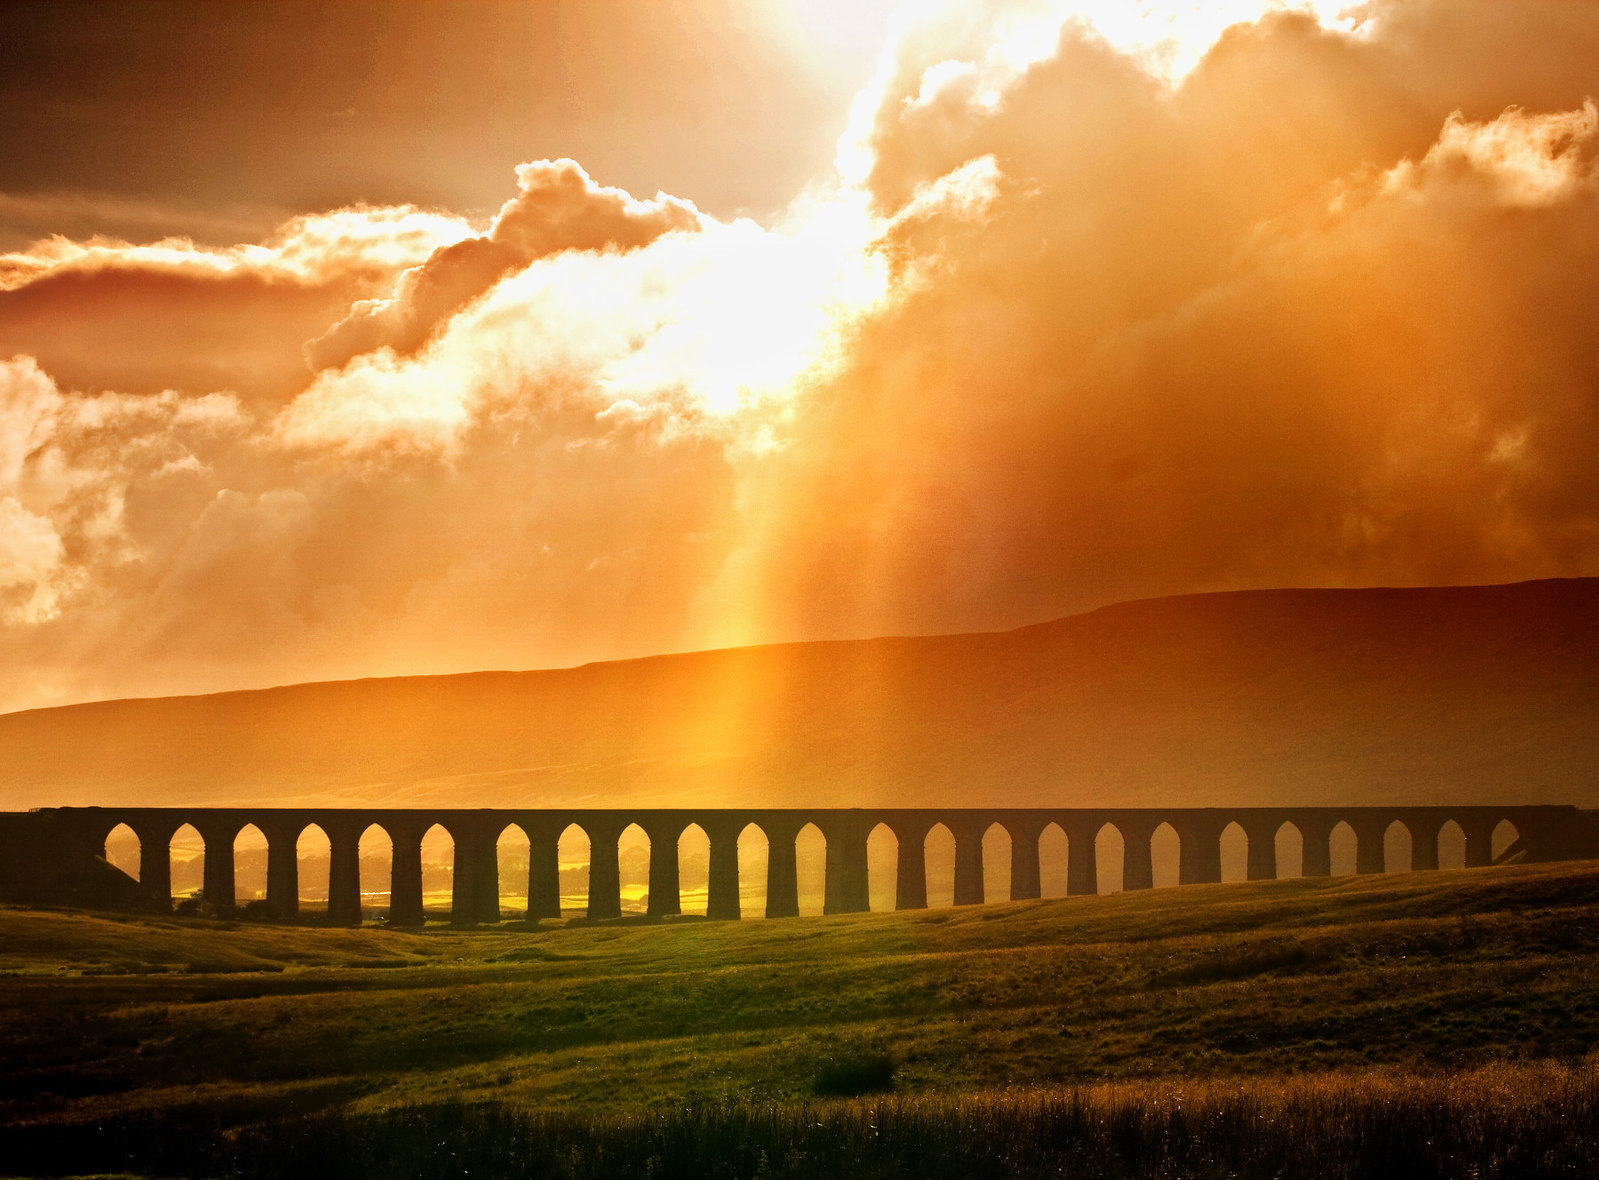 Ribblehead Viaduct cast in a glowing light. Credit chantrybee